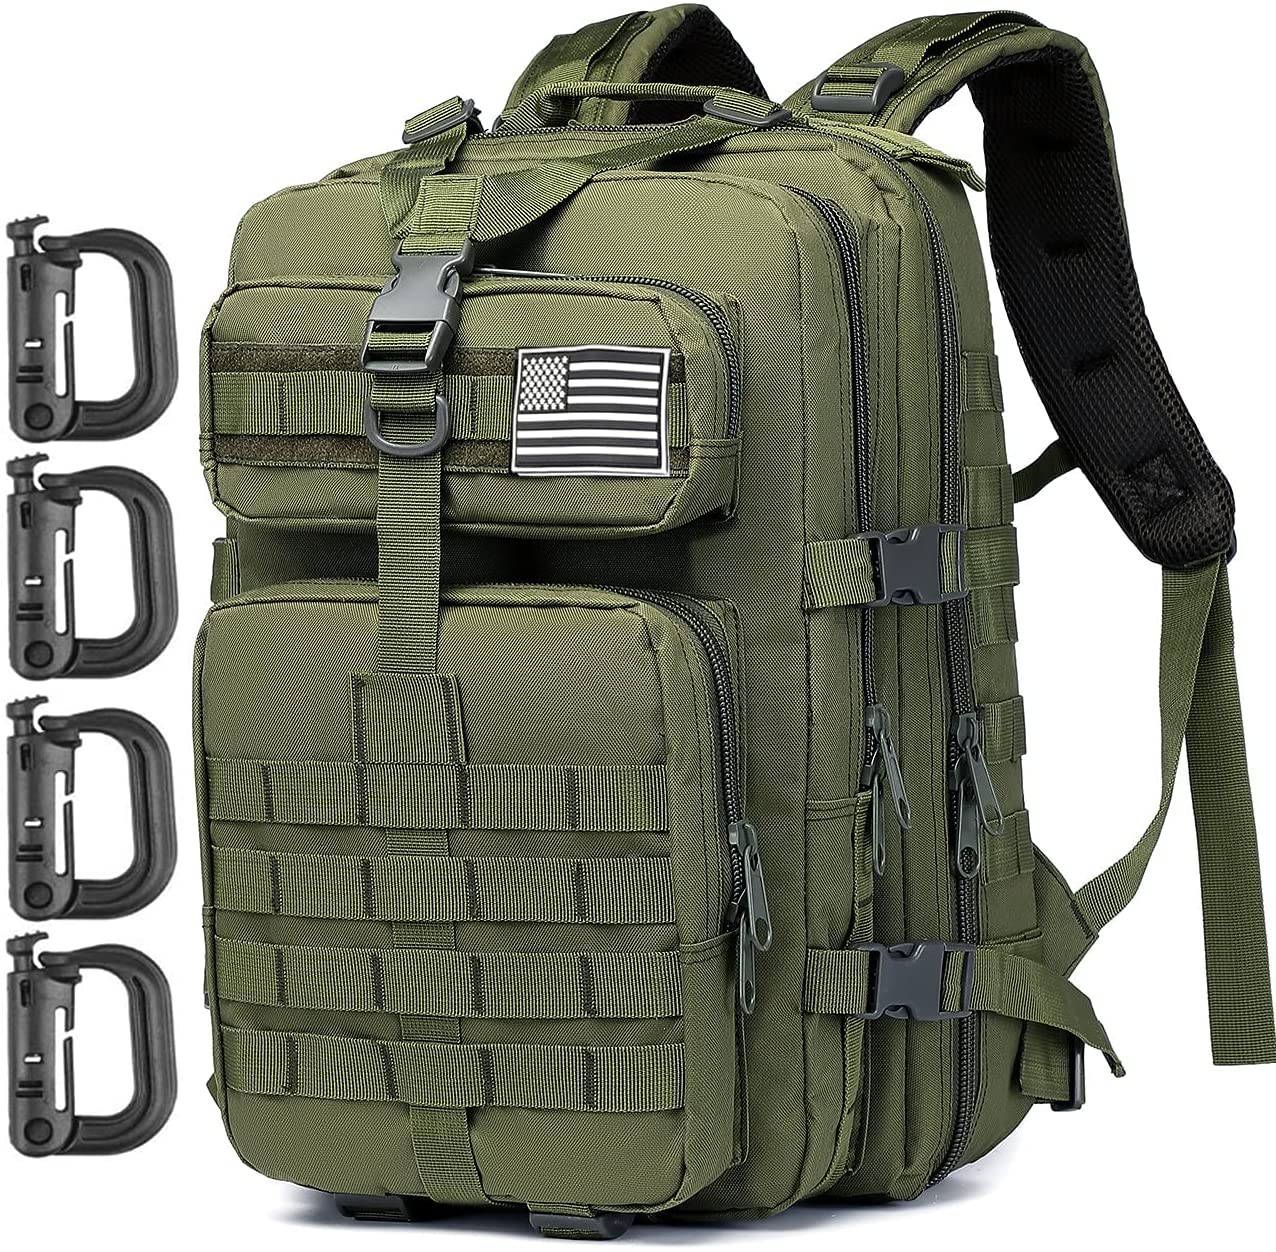 Tactical Rucksack Backpack Military Hunting Hiking Daypack Large Army Molle Backpack